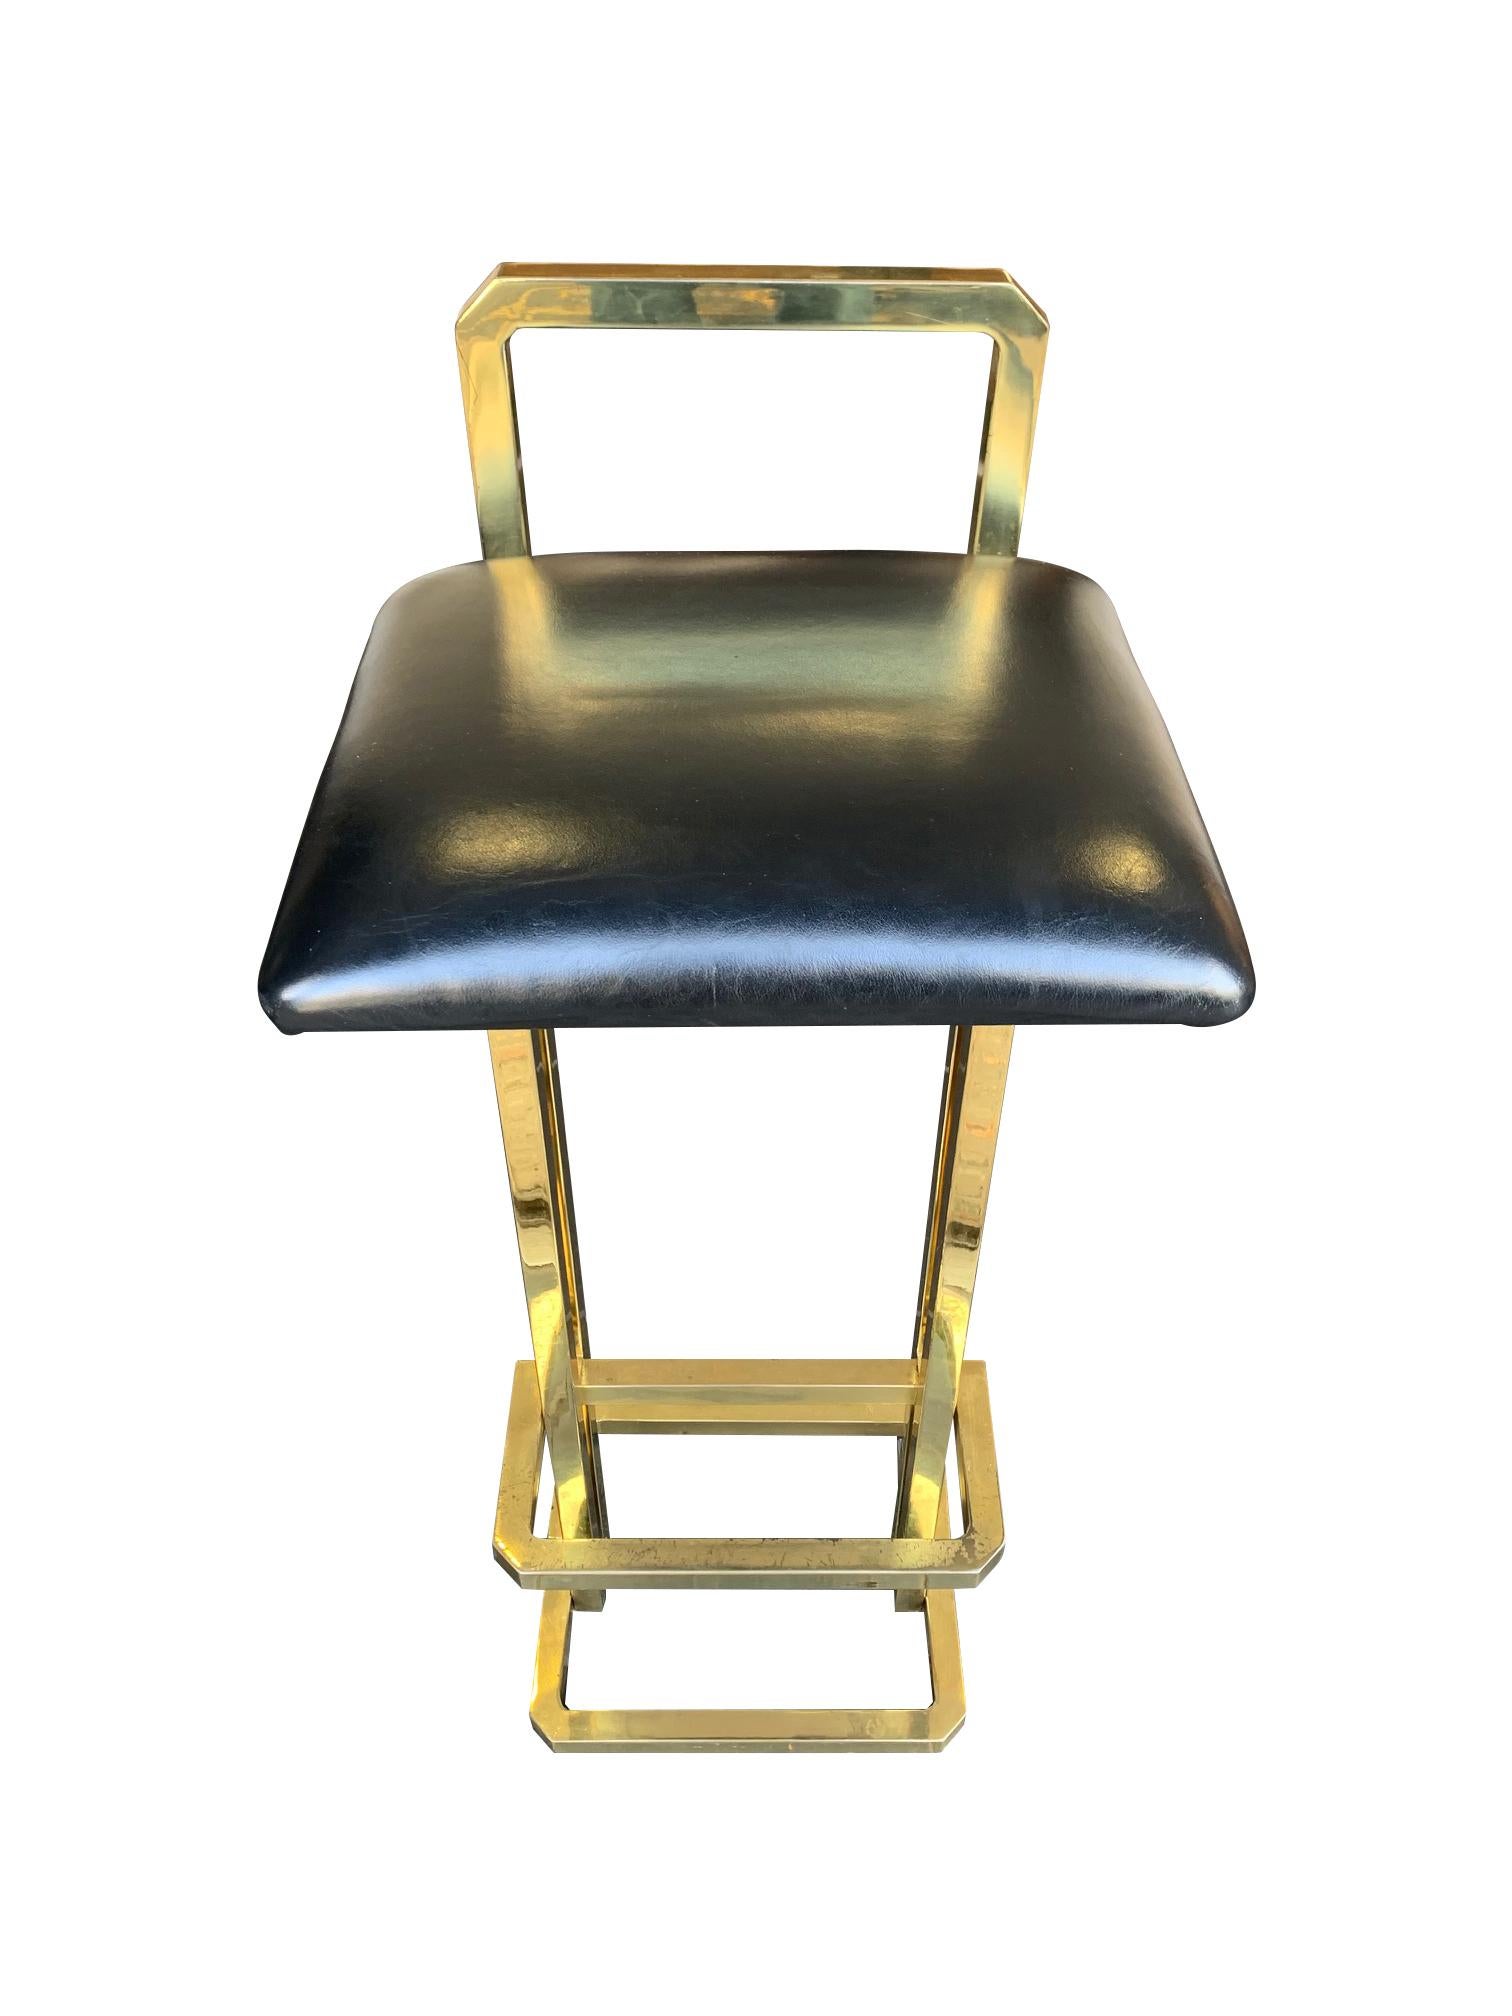 Set of 3 Maison Jansen Style Gilt Metal Stools with Black Leather Seat Pads For Sale 5